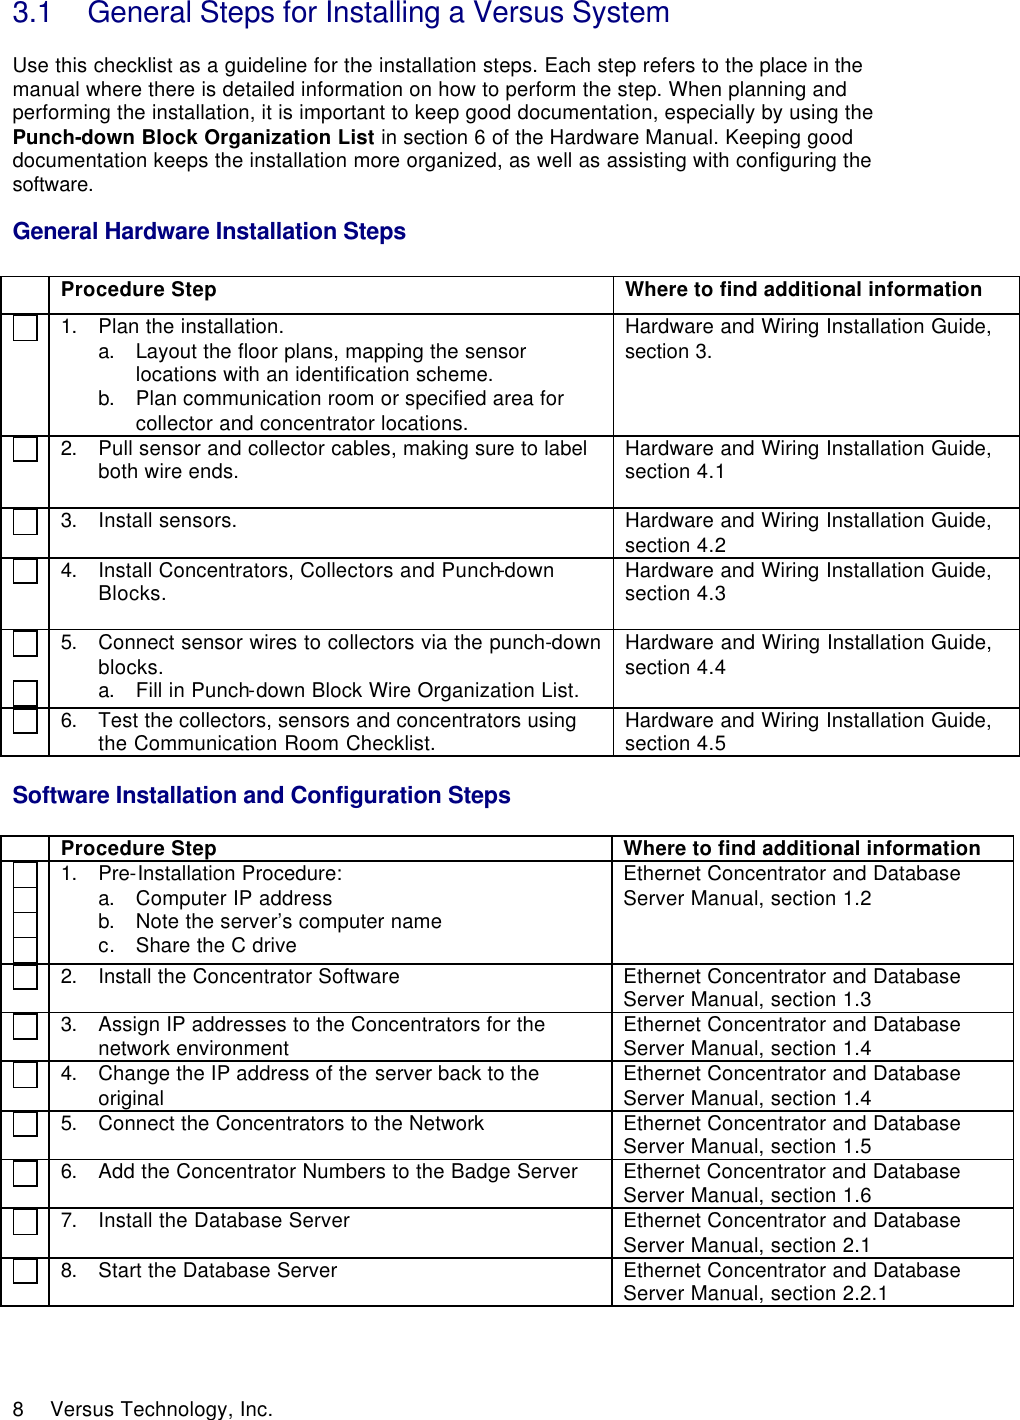  8 Versus Technology, Inc. 3.1 General Steps for Installing a Versus System  Use this checklist as a guideline for the installation steps. Each step refers to the place in the manual where there is detailed information on how to perform the step. When planning and performing the installation, it is important to keep good documentation, especially by using the Punch-down Block Organization List in section 6 of the Hardware Manual. Keeping good documentation keeps the installation more organized, as well as assisting with configuring the software.  General Hardware Installation Steps   Procedure Step Where to find additional information   1. Plan the installation.  a. Layout the floor plans, mapping the sensor locations with an identification scheme. b. Plan communication room or specified area for collector and concentrator locations. Hardware and Wiring Installation Guide, section 3.   2. Pull sensor and collector cables, making sure to label both wire ends.     Hardware and Wiring Installation Guide, section 4.1   3. Install sensors.   Hardware and Wiring Installation Guide, section 4.2   4. Install Concentrators, Collectors and Punch-down Blocks.    Hardware and Wiring Installation Guide, section 4.3     5. Connect sensor wires to collectors via the punch-down blocks. a. Fill in Punch-down Block Wire Organization List. Hardware and Wiring Installation Guide, section 4.4   6. Test the collectors, sensors and concentrators using the Communication Room Checklist. Hardware and Wiring Installation Guide, section 4.5  Software Installation and Configuration Steps   Procedure Step Where to find additional information      1. Pre-Installation Procedure: a. Computer IP address b. Note the server’s computer name c. Share the C drive Ethernet Concentrator and Database Server Manual, section 1.2   2. Install the Concentrator Software Ethernet Concentrator and Database Server Manual, section 1.3   3. Assign IP addresses to the Concentrators for the network environment Ethernet Concentrator and Database Server Manual, section 1.4   4. Change the IP address of the server back to the original  Ethernet Concentrator and Database Server Manual, section 1.4   5. Connect the Concentrators to the Network Ethernet Concentrator and Database Server Manual, section 1.5   6. Add the Concentrator Numbers to the Badge Server Ethernet Concentrator and Database Server Manual, section 1.6   7. Install the Database Server Ethernet Concentrator and Database Server Manual, section 2.1   8. Start the Database Server Ethernet Concentrator and Database Server Manual, section 2.2.1 